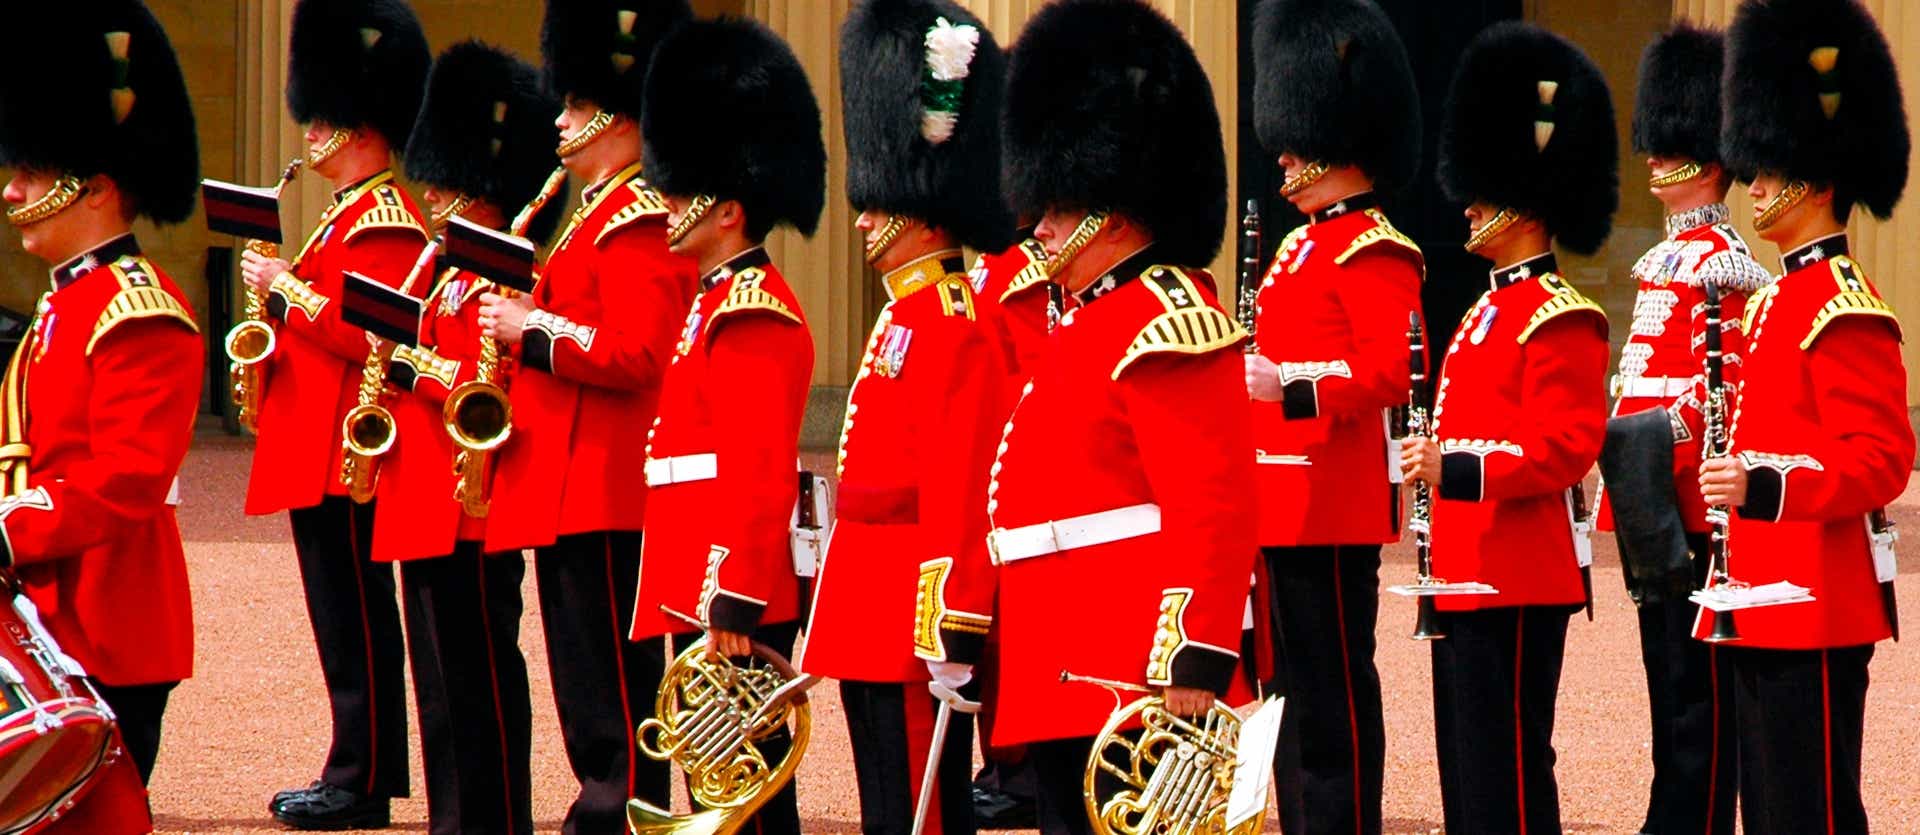 Changing of the Guards  <span class="iconos separador"></span> London  <span class="iconos separador"></span> England